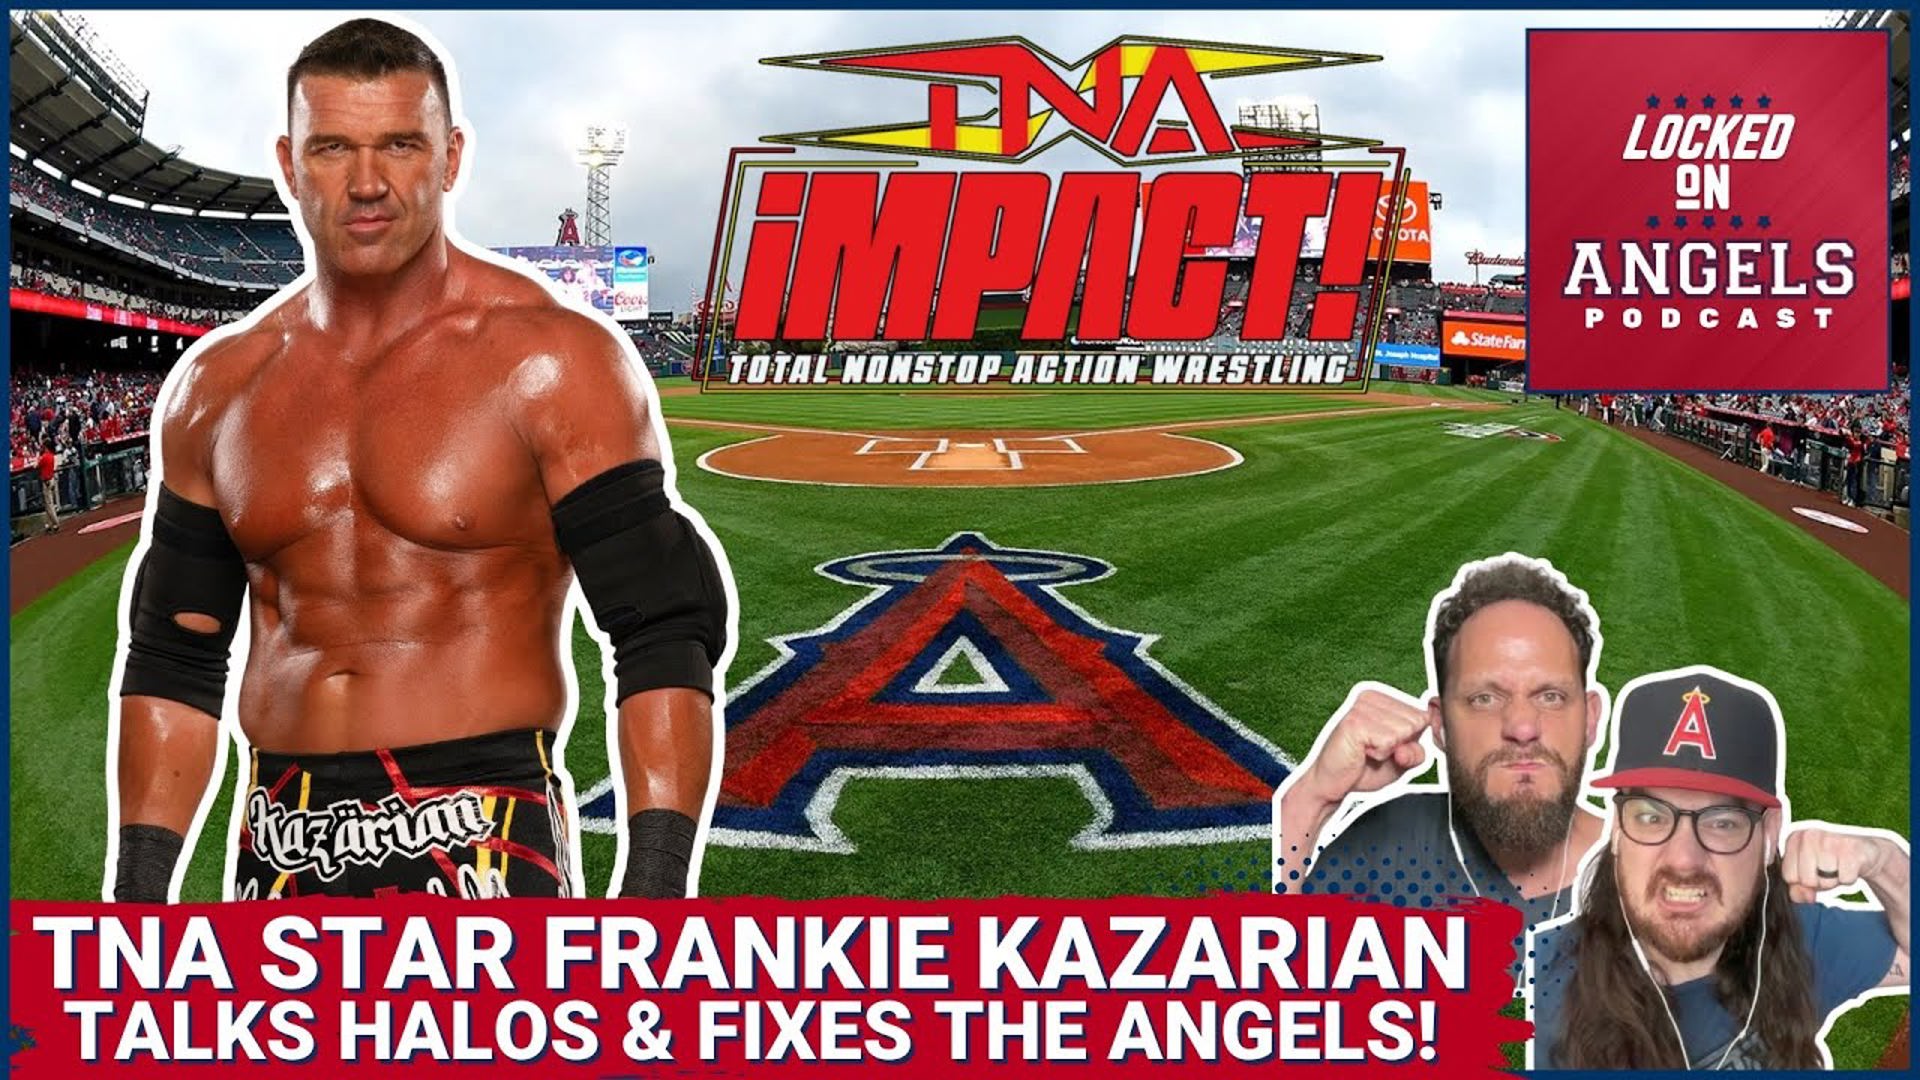 The Los Angeles Angels have a HUGE fan in TNA Wrestling Star Frankie Kazarian, and he joins us on Locked On Angels for a special interview!